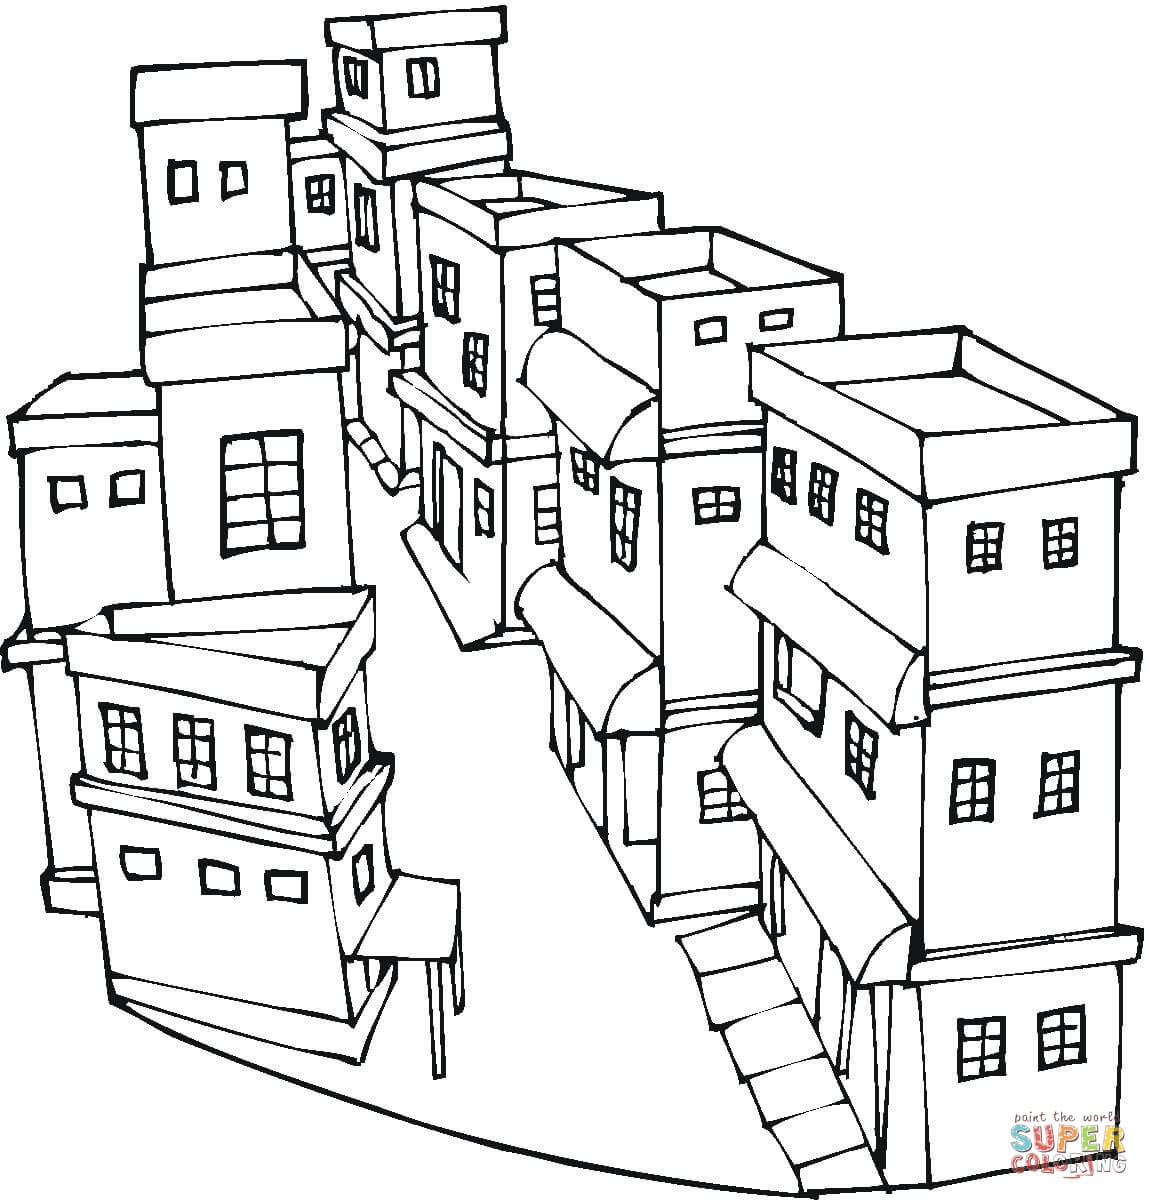 City Coloring Page A Street Of A City Coloring Page Free Printable Coloring Pages